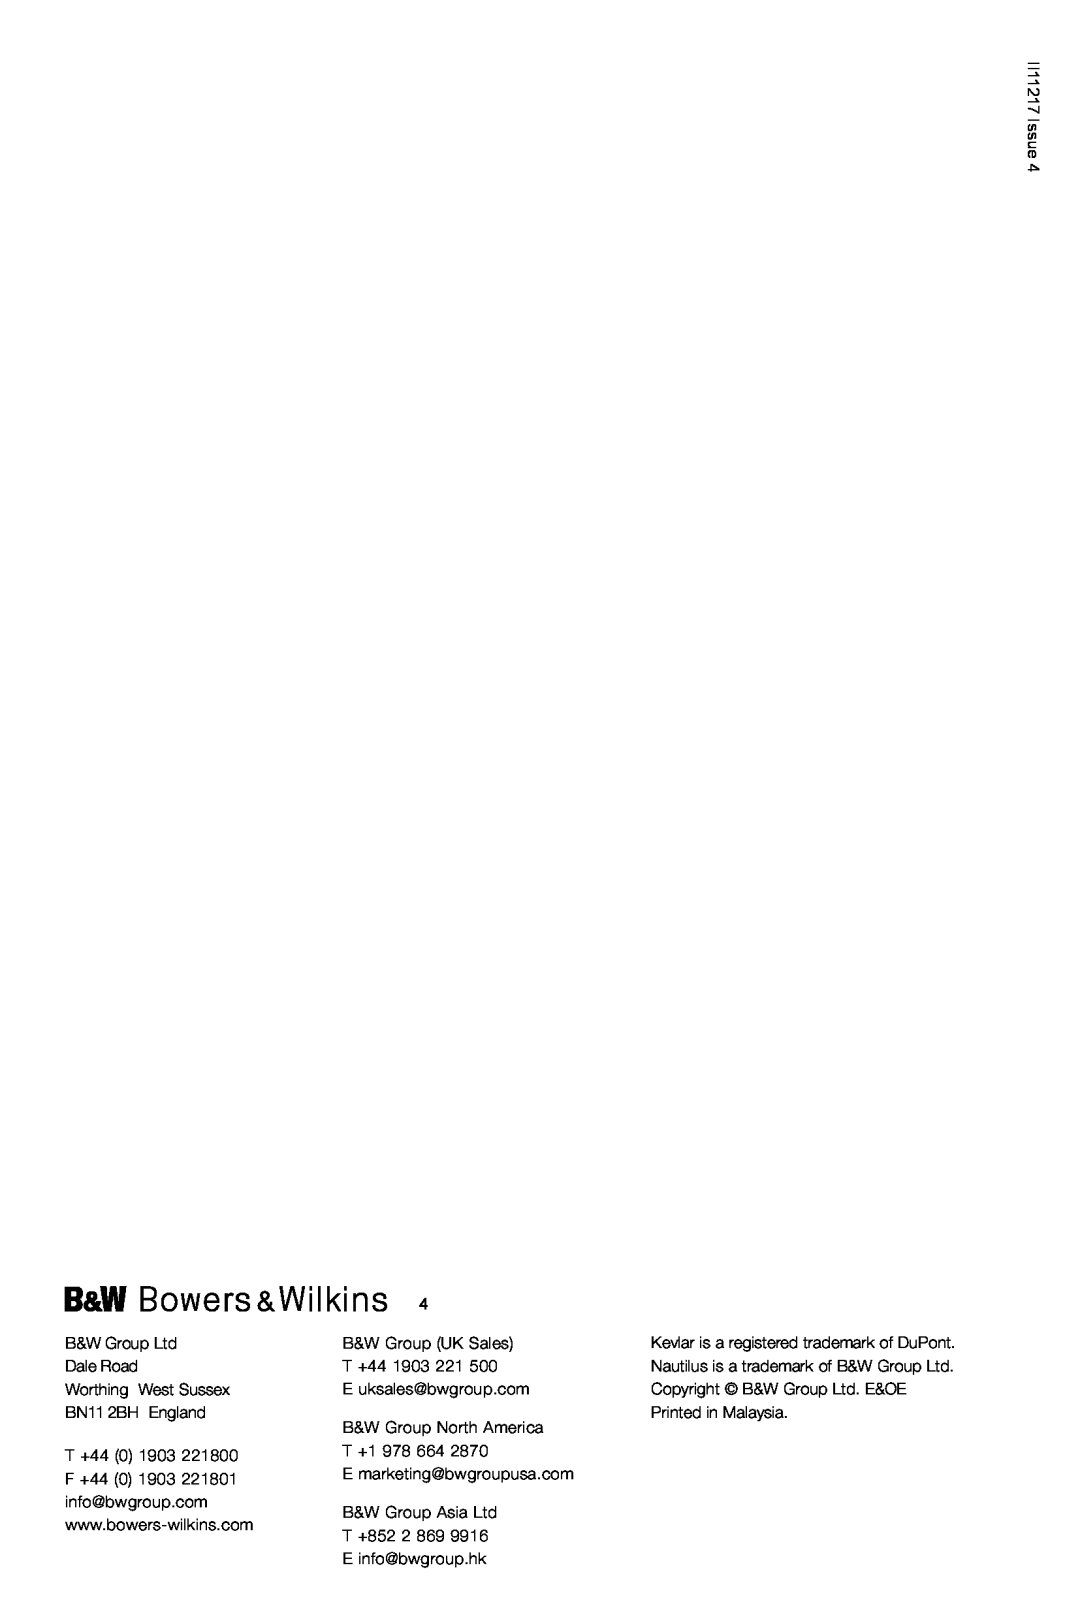 Bowers & Wilkins VM6 manual II11217 Issue, BN11 2BH England, B&W Group UK Sales T +44, B&W Group North America T +1 